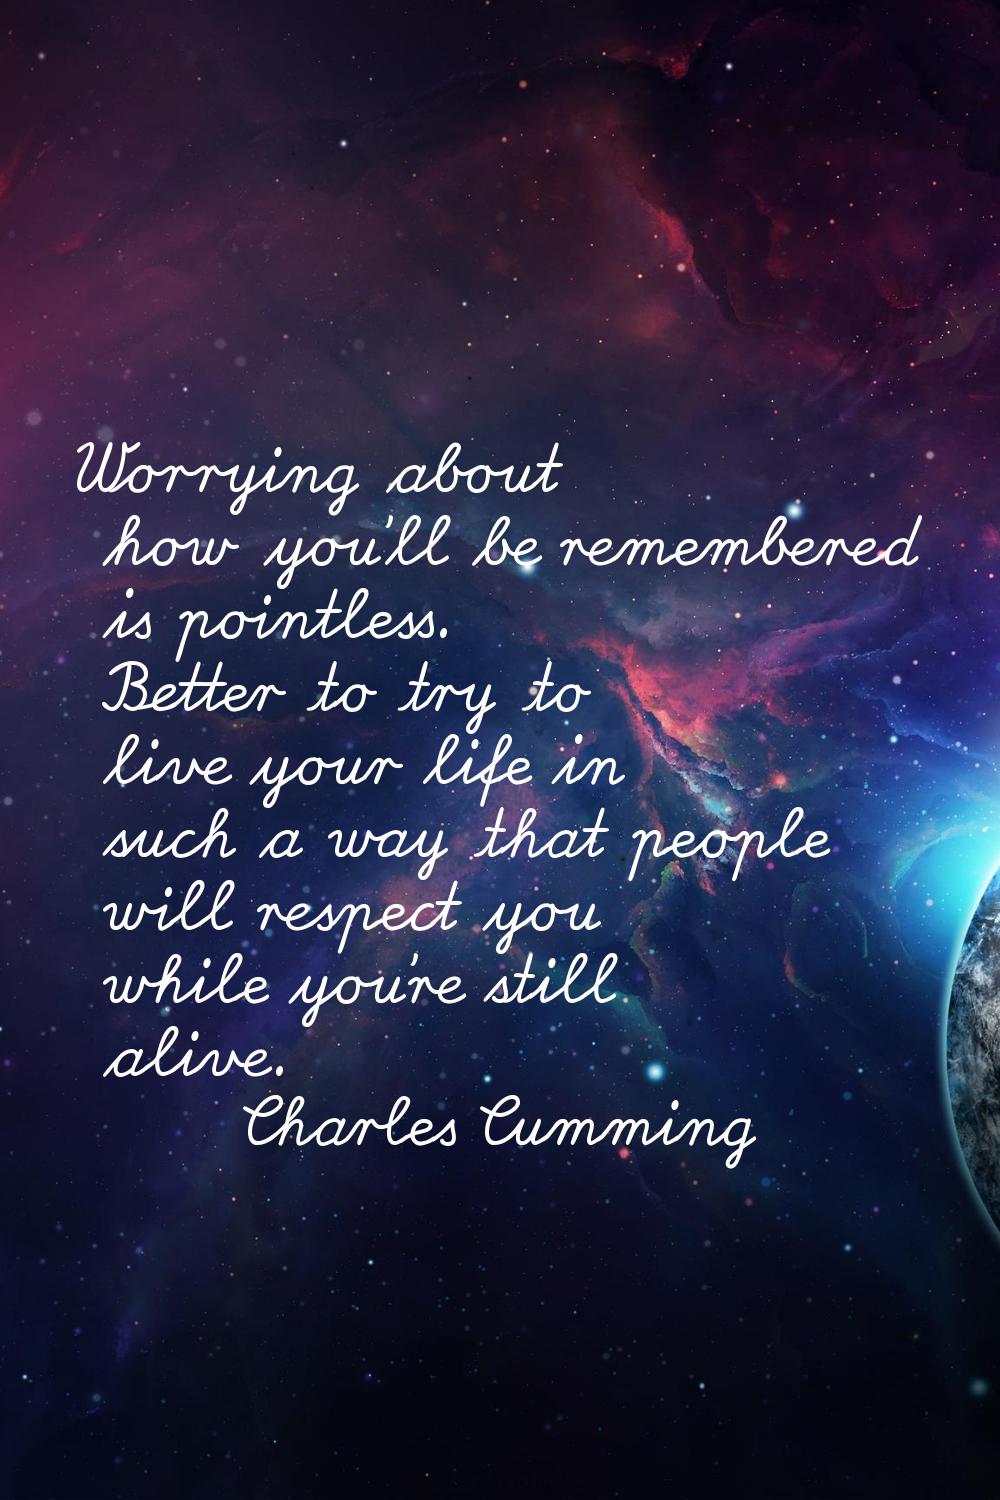 Worrying about how you'll be remembered is pointless. Better to try to live your life in such a way